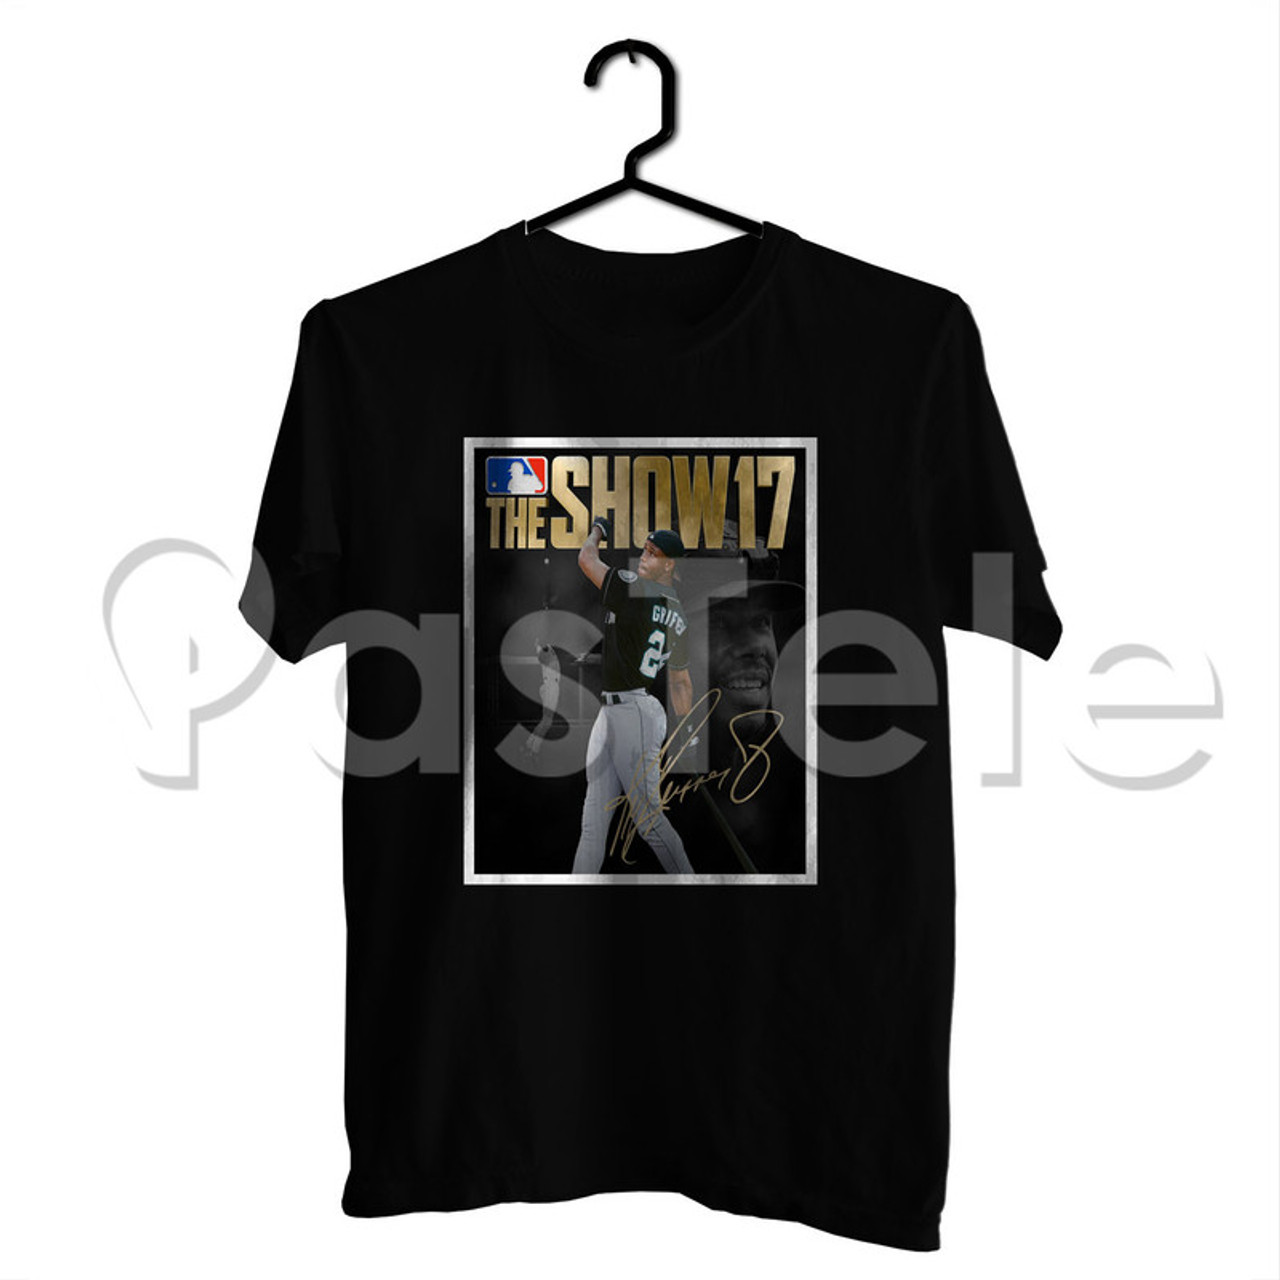 MLB The Show 17 Custom Personalized T Shirt Tees Apparel Cotton